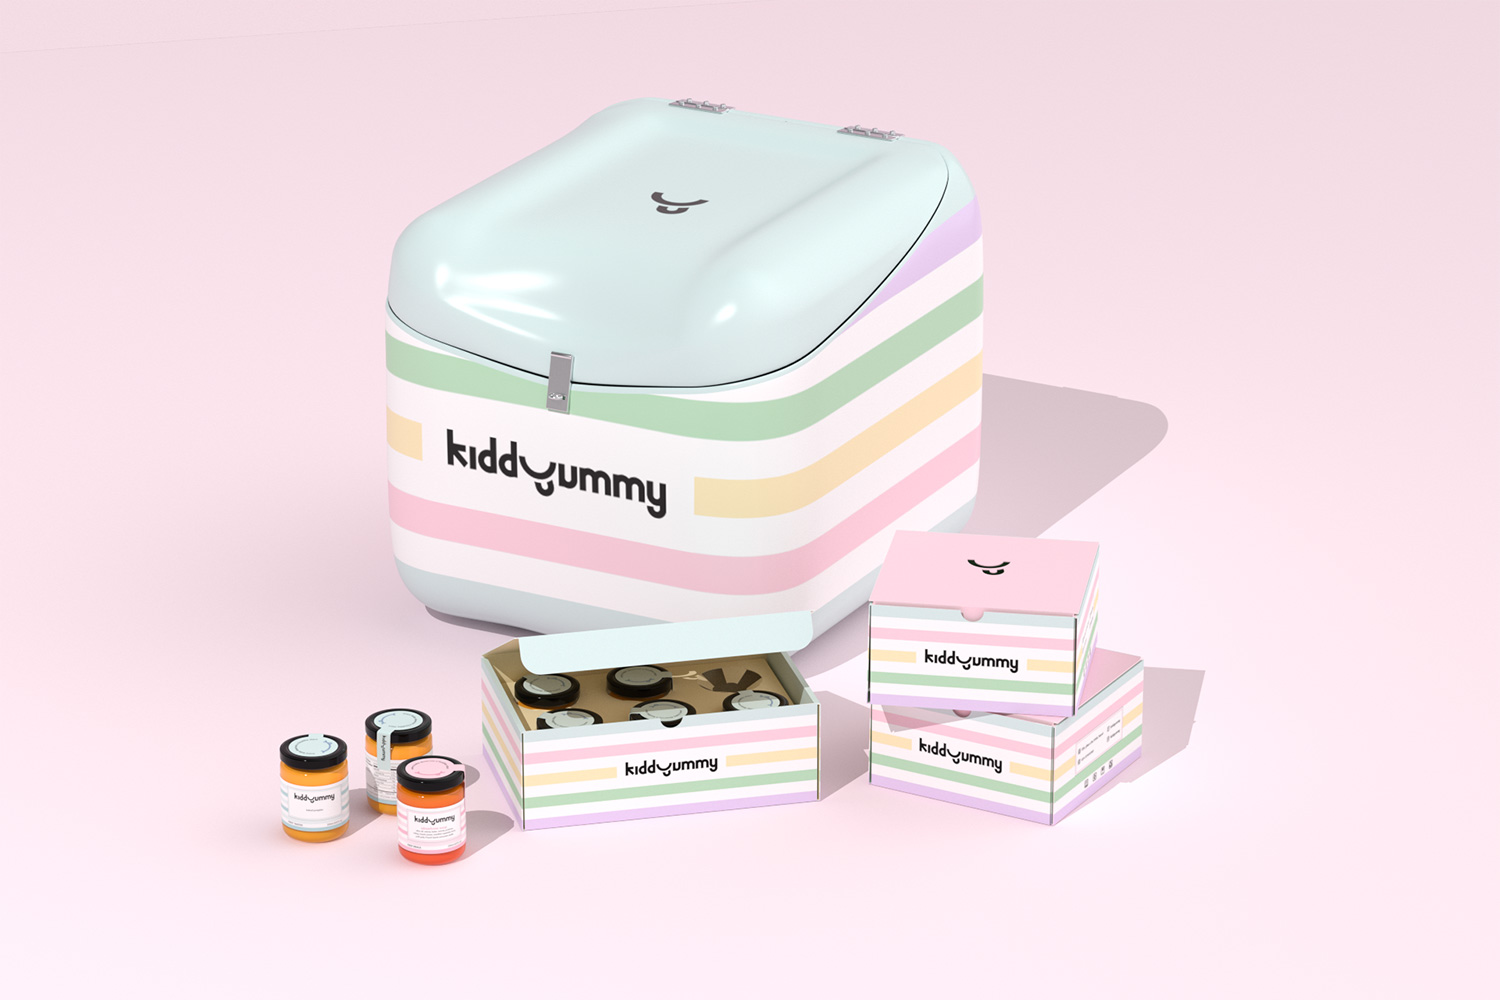 Kiddyummy packaging design including scooter box, jar, cartoon box with three different sizes